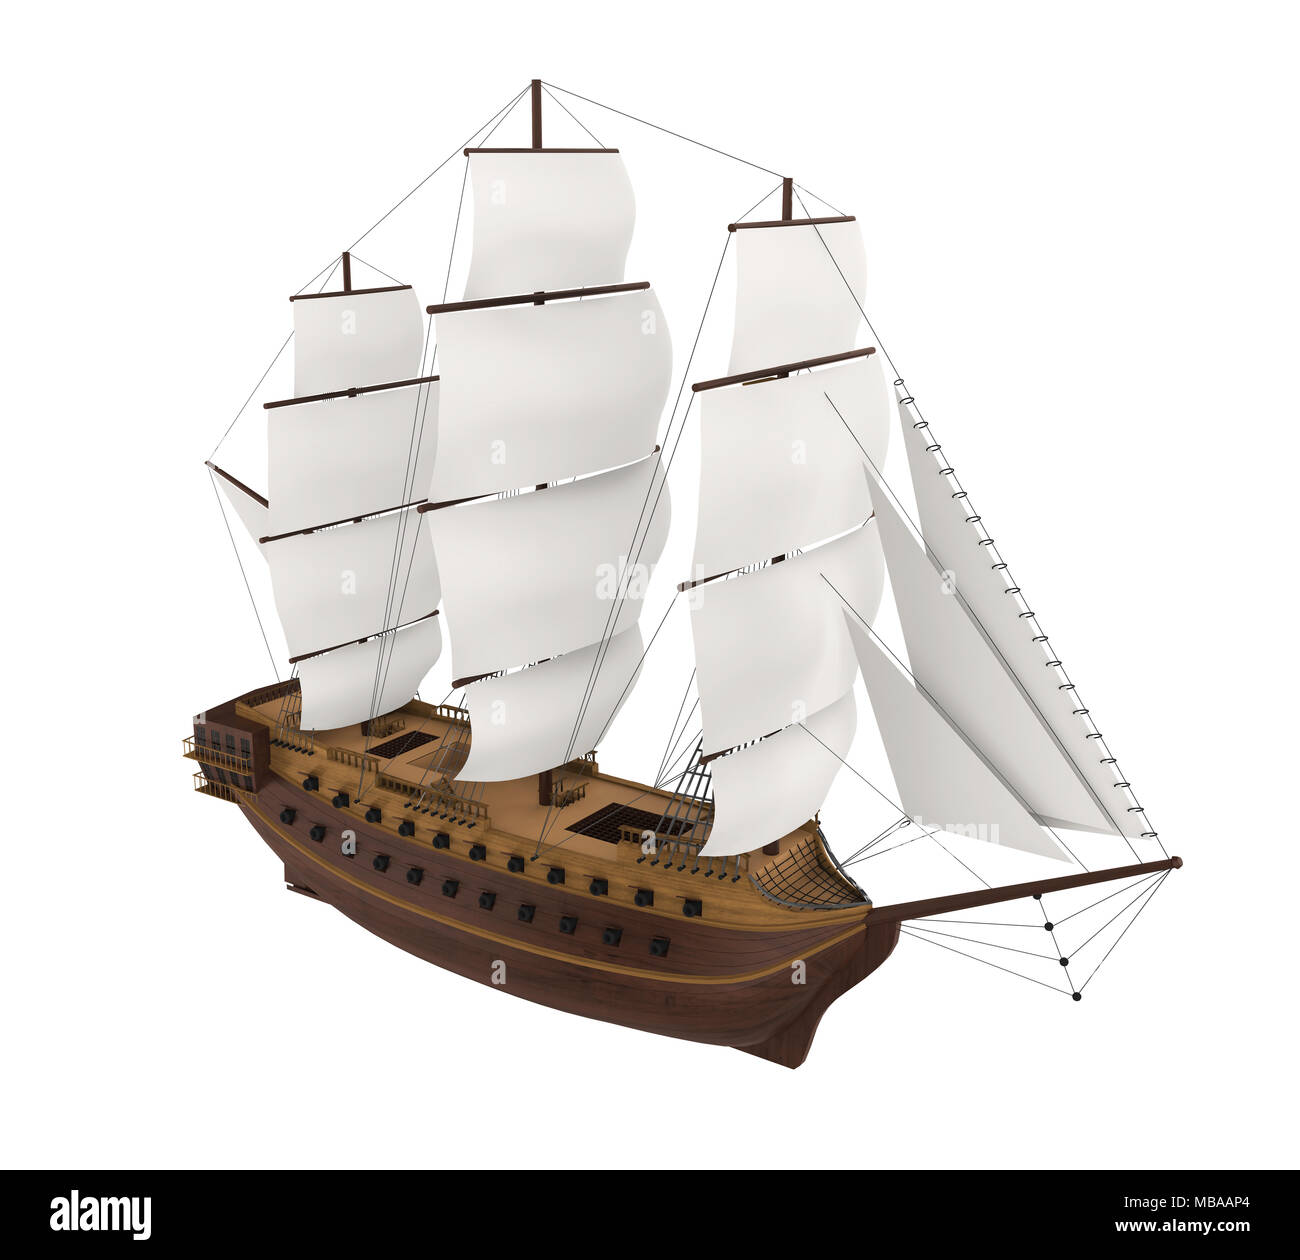 Age Of Sail Galeon Wooden Sailing Ship Isolated On White Design